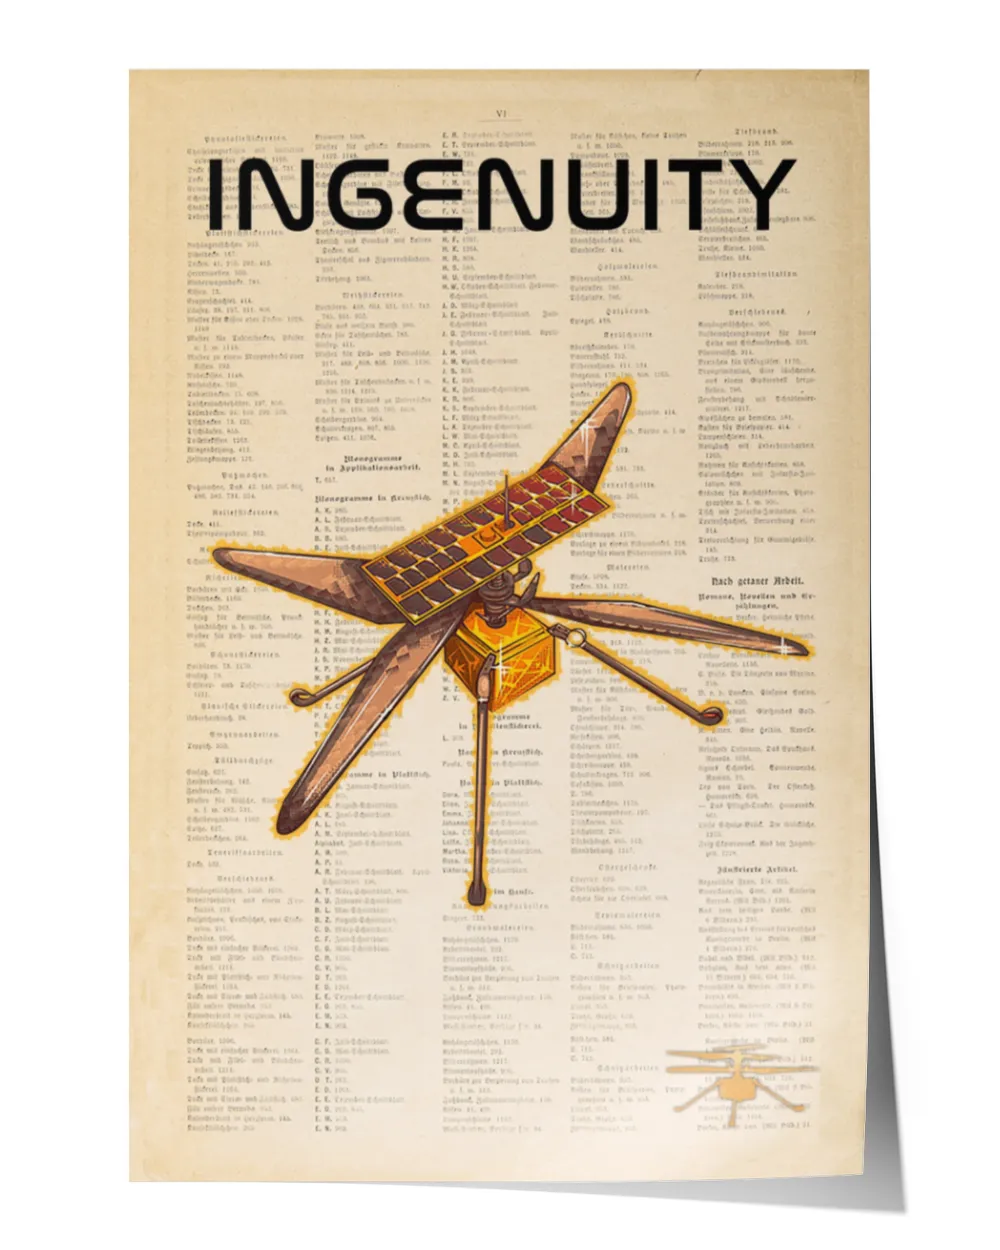 Mars helicopter Ingenuity Vintage Poster,Robots and space exploration Poster, Space Wall Art